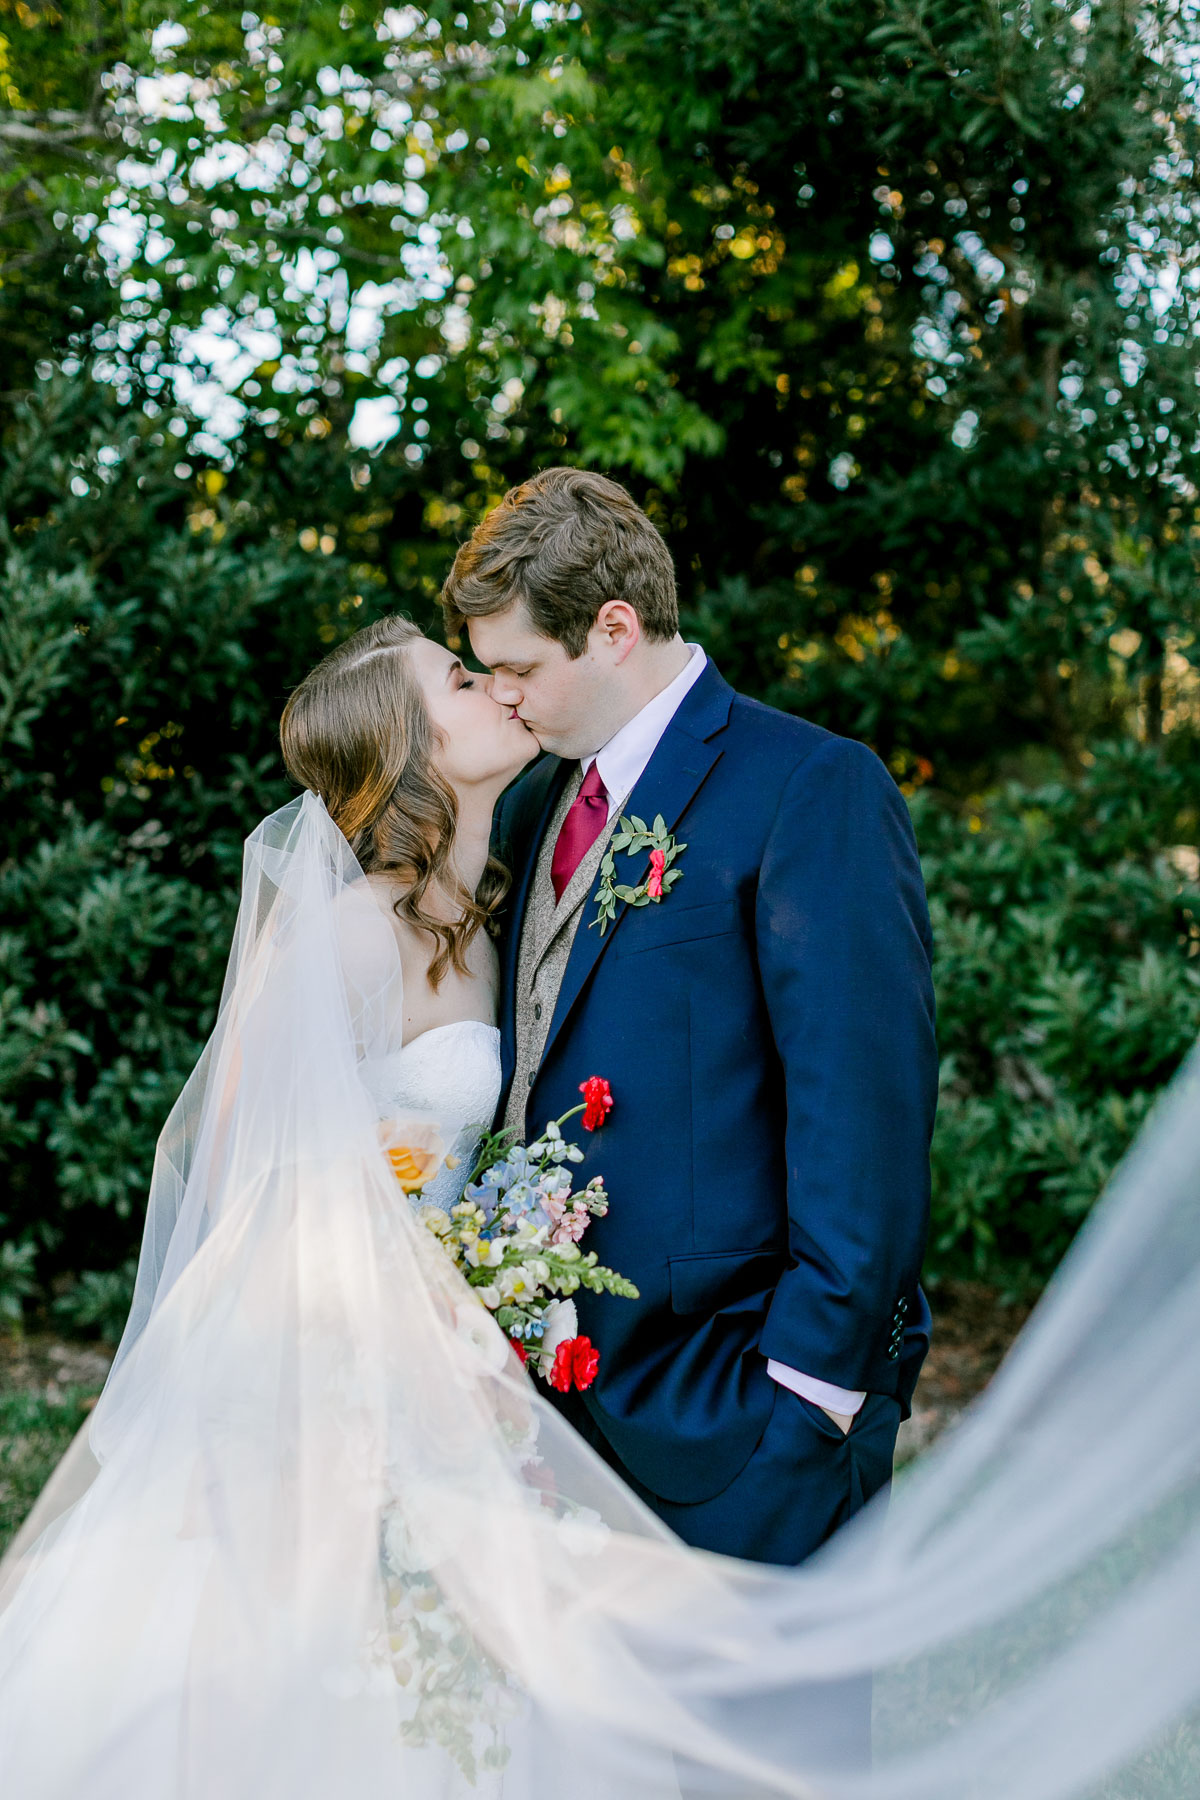 Bride and groom share a kiss in front of tall green bushes